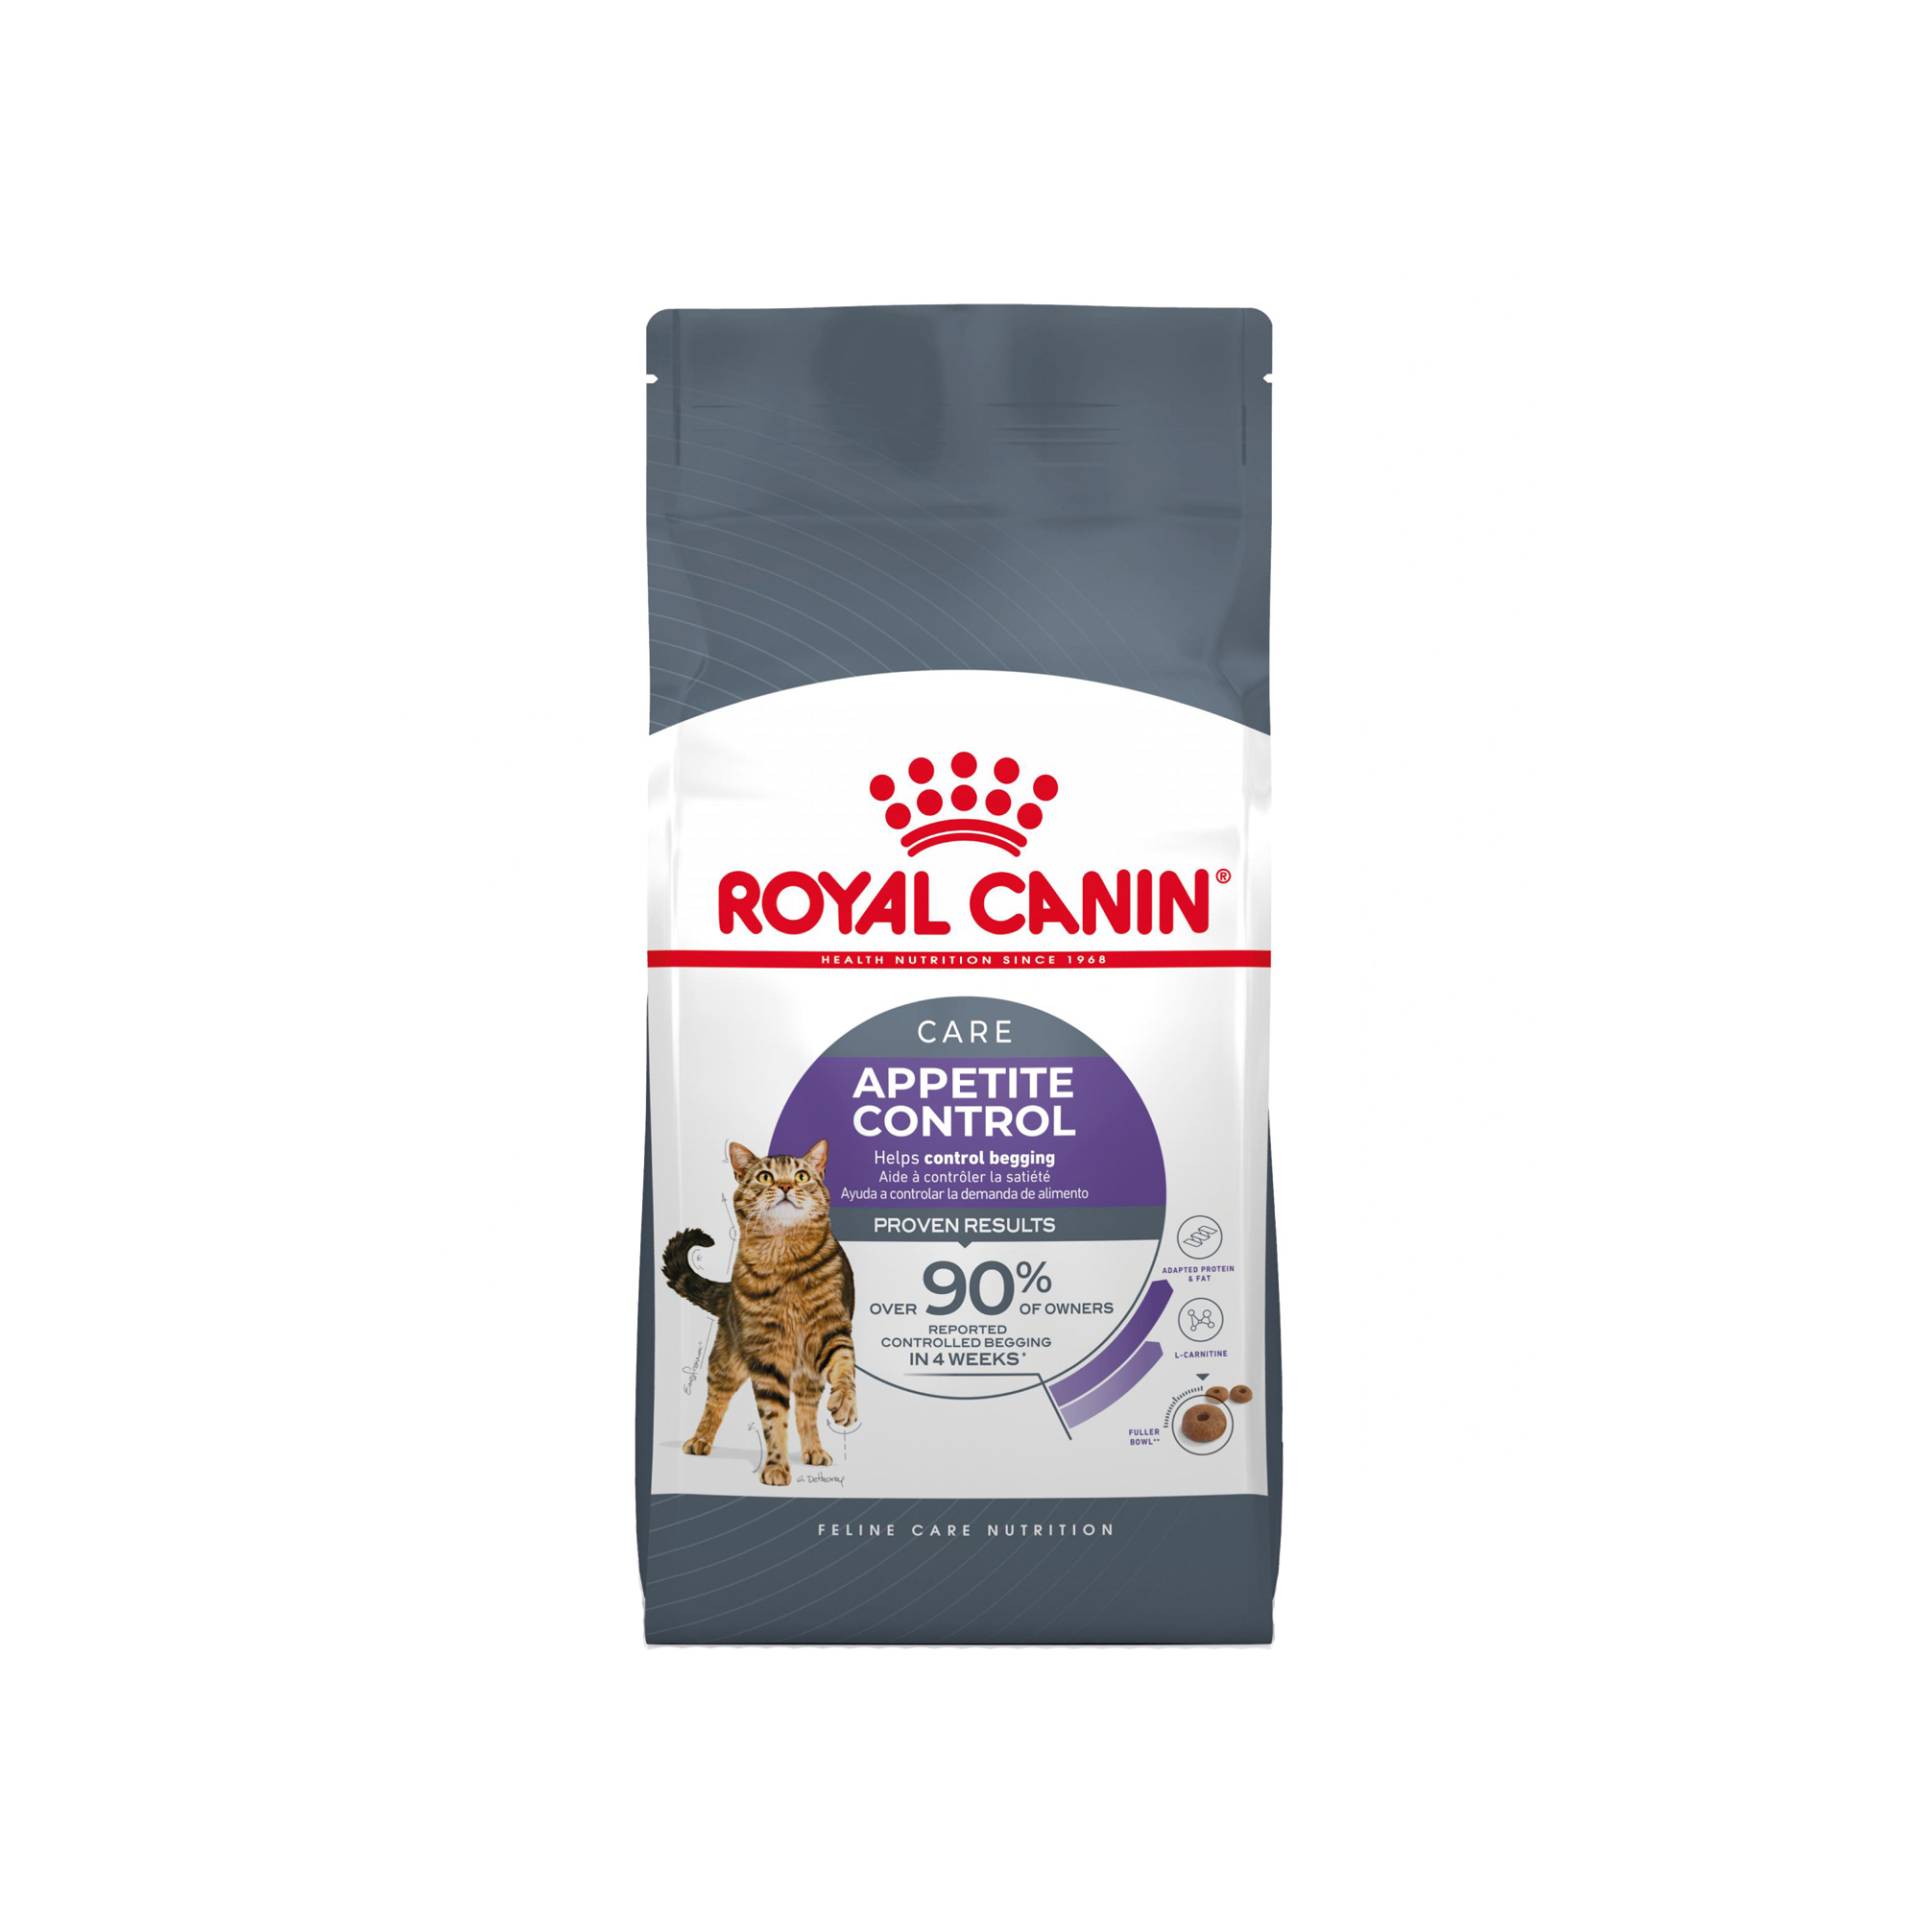 Royal Canin Appetite Control Care - 3,5 kg von Royal Canin